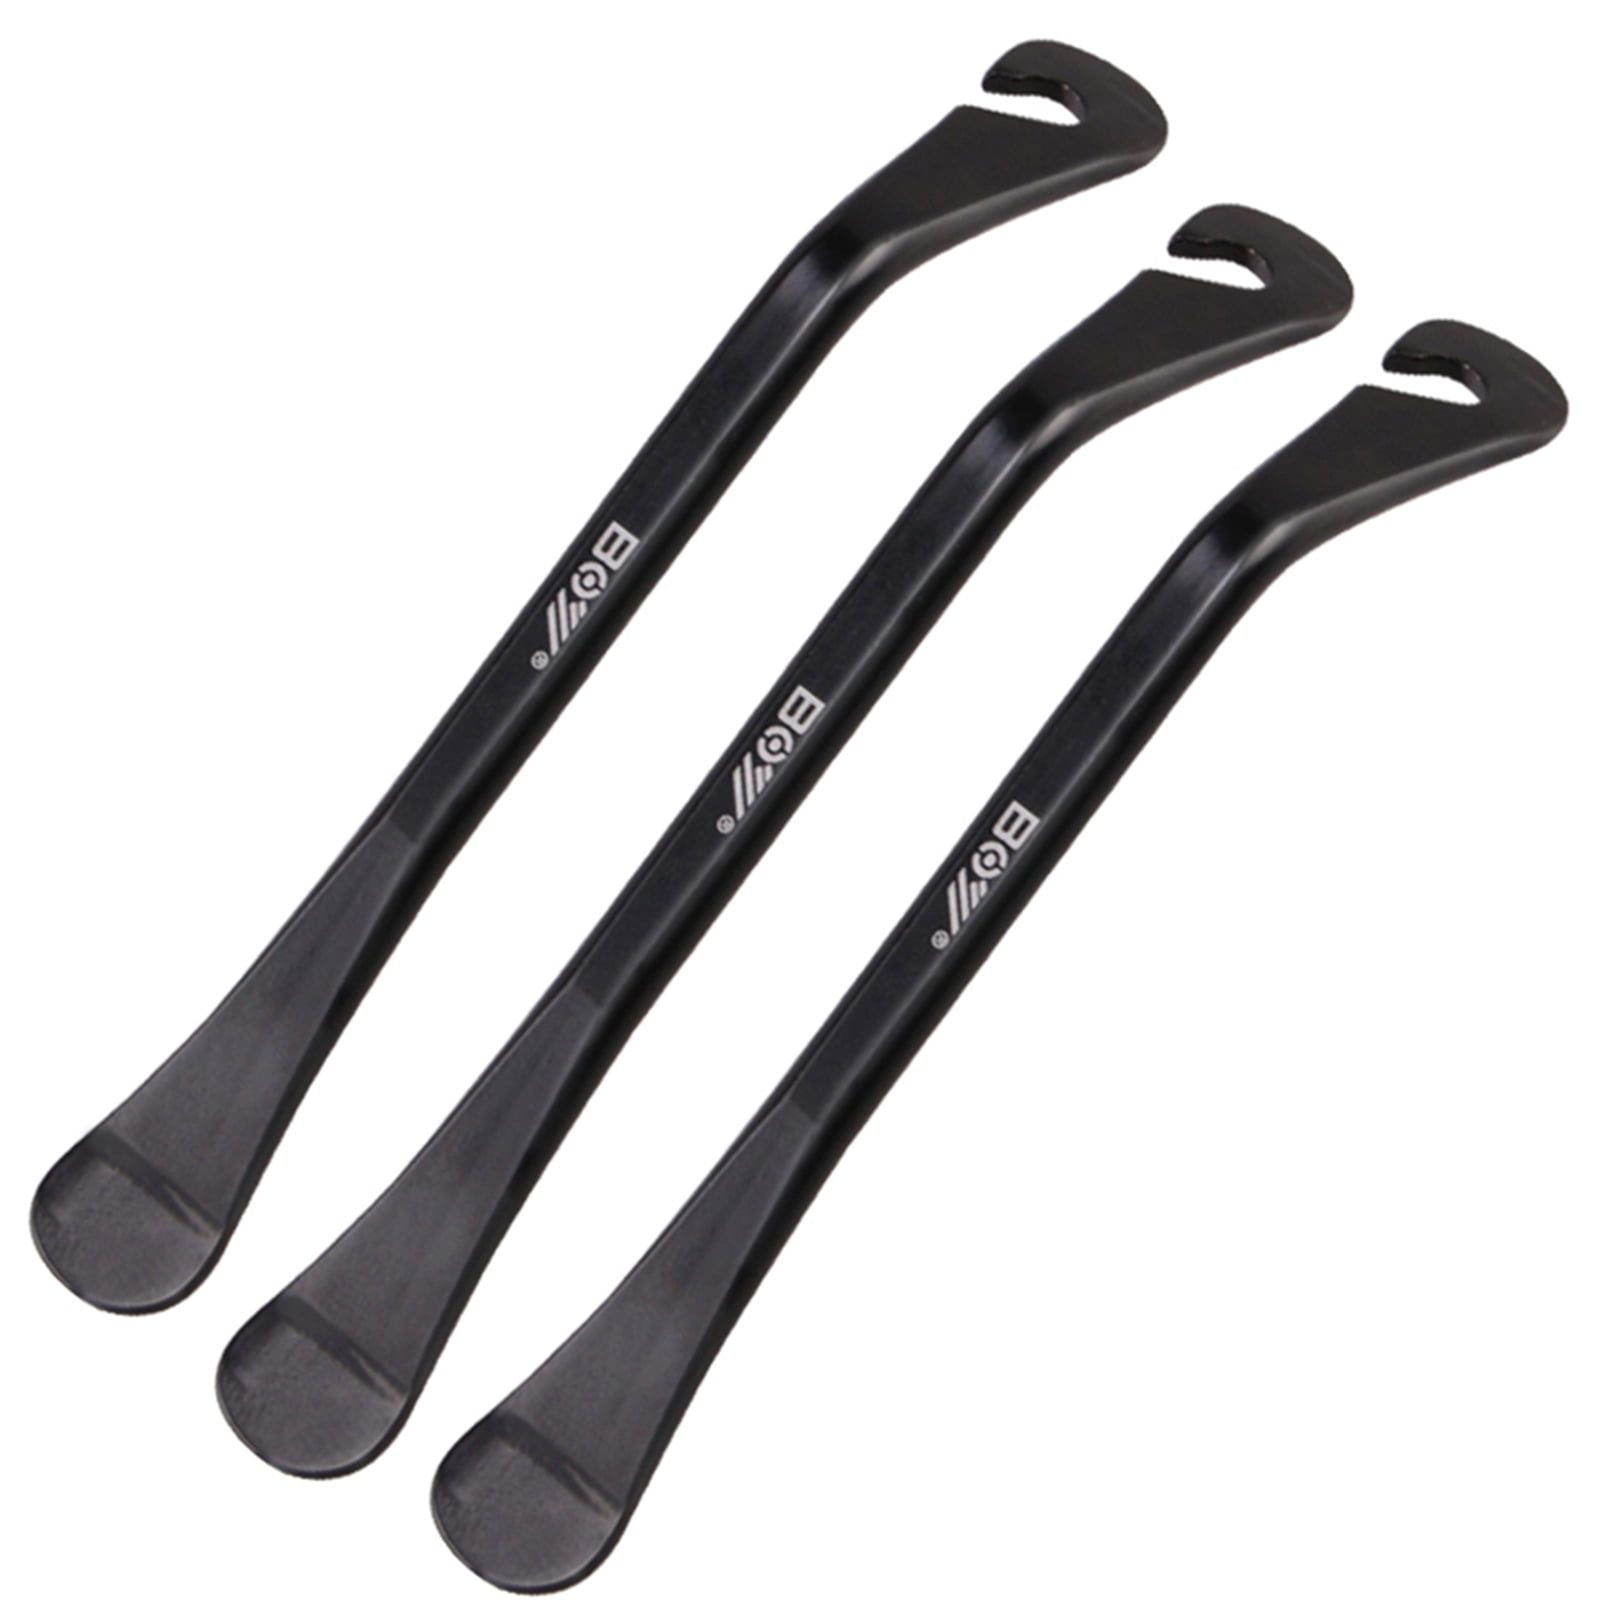 3 Pcs Bicycle Tire Lever Iron Tyre Changing Carbon Steel Levers Repair Tool